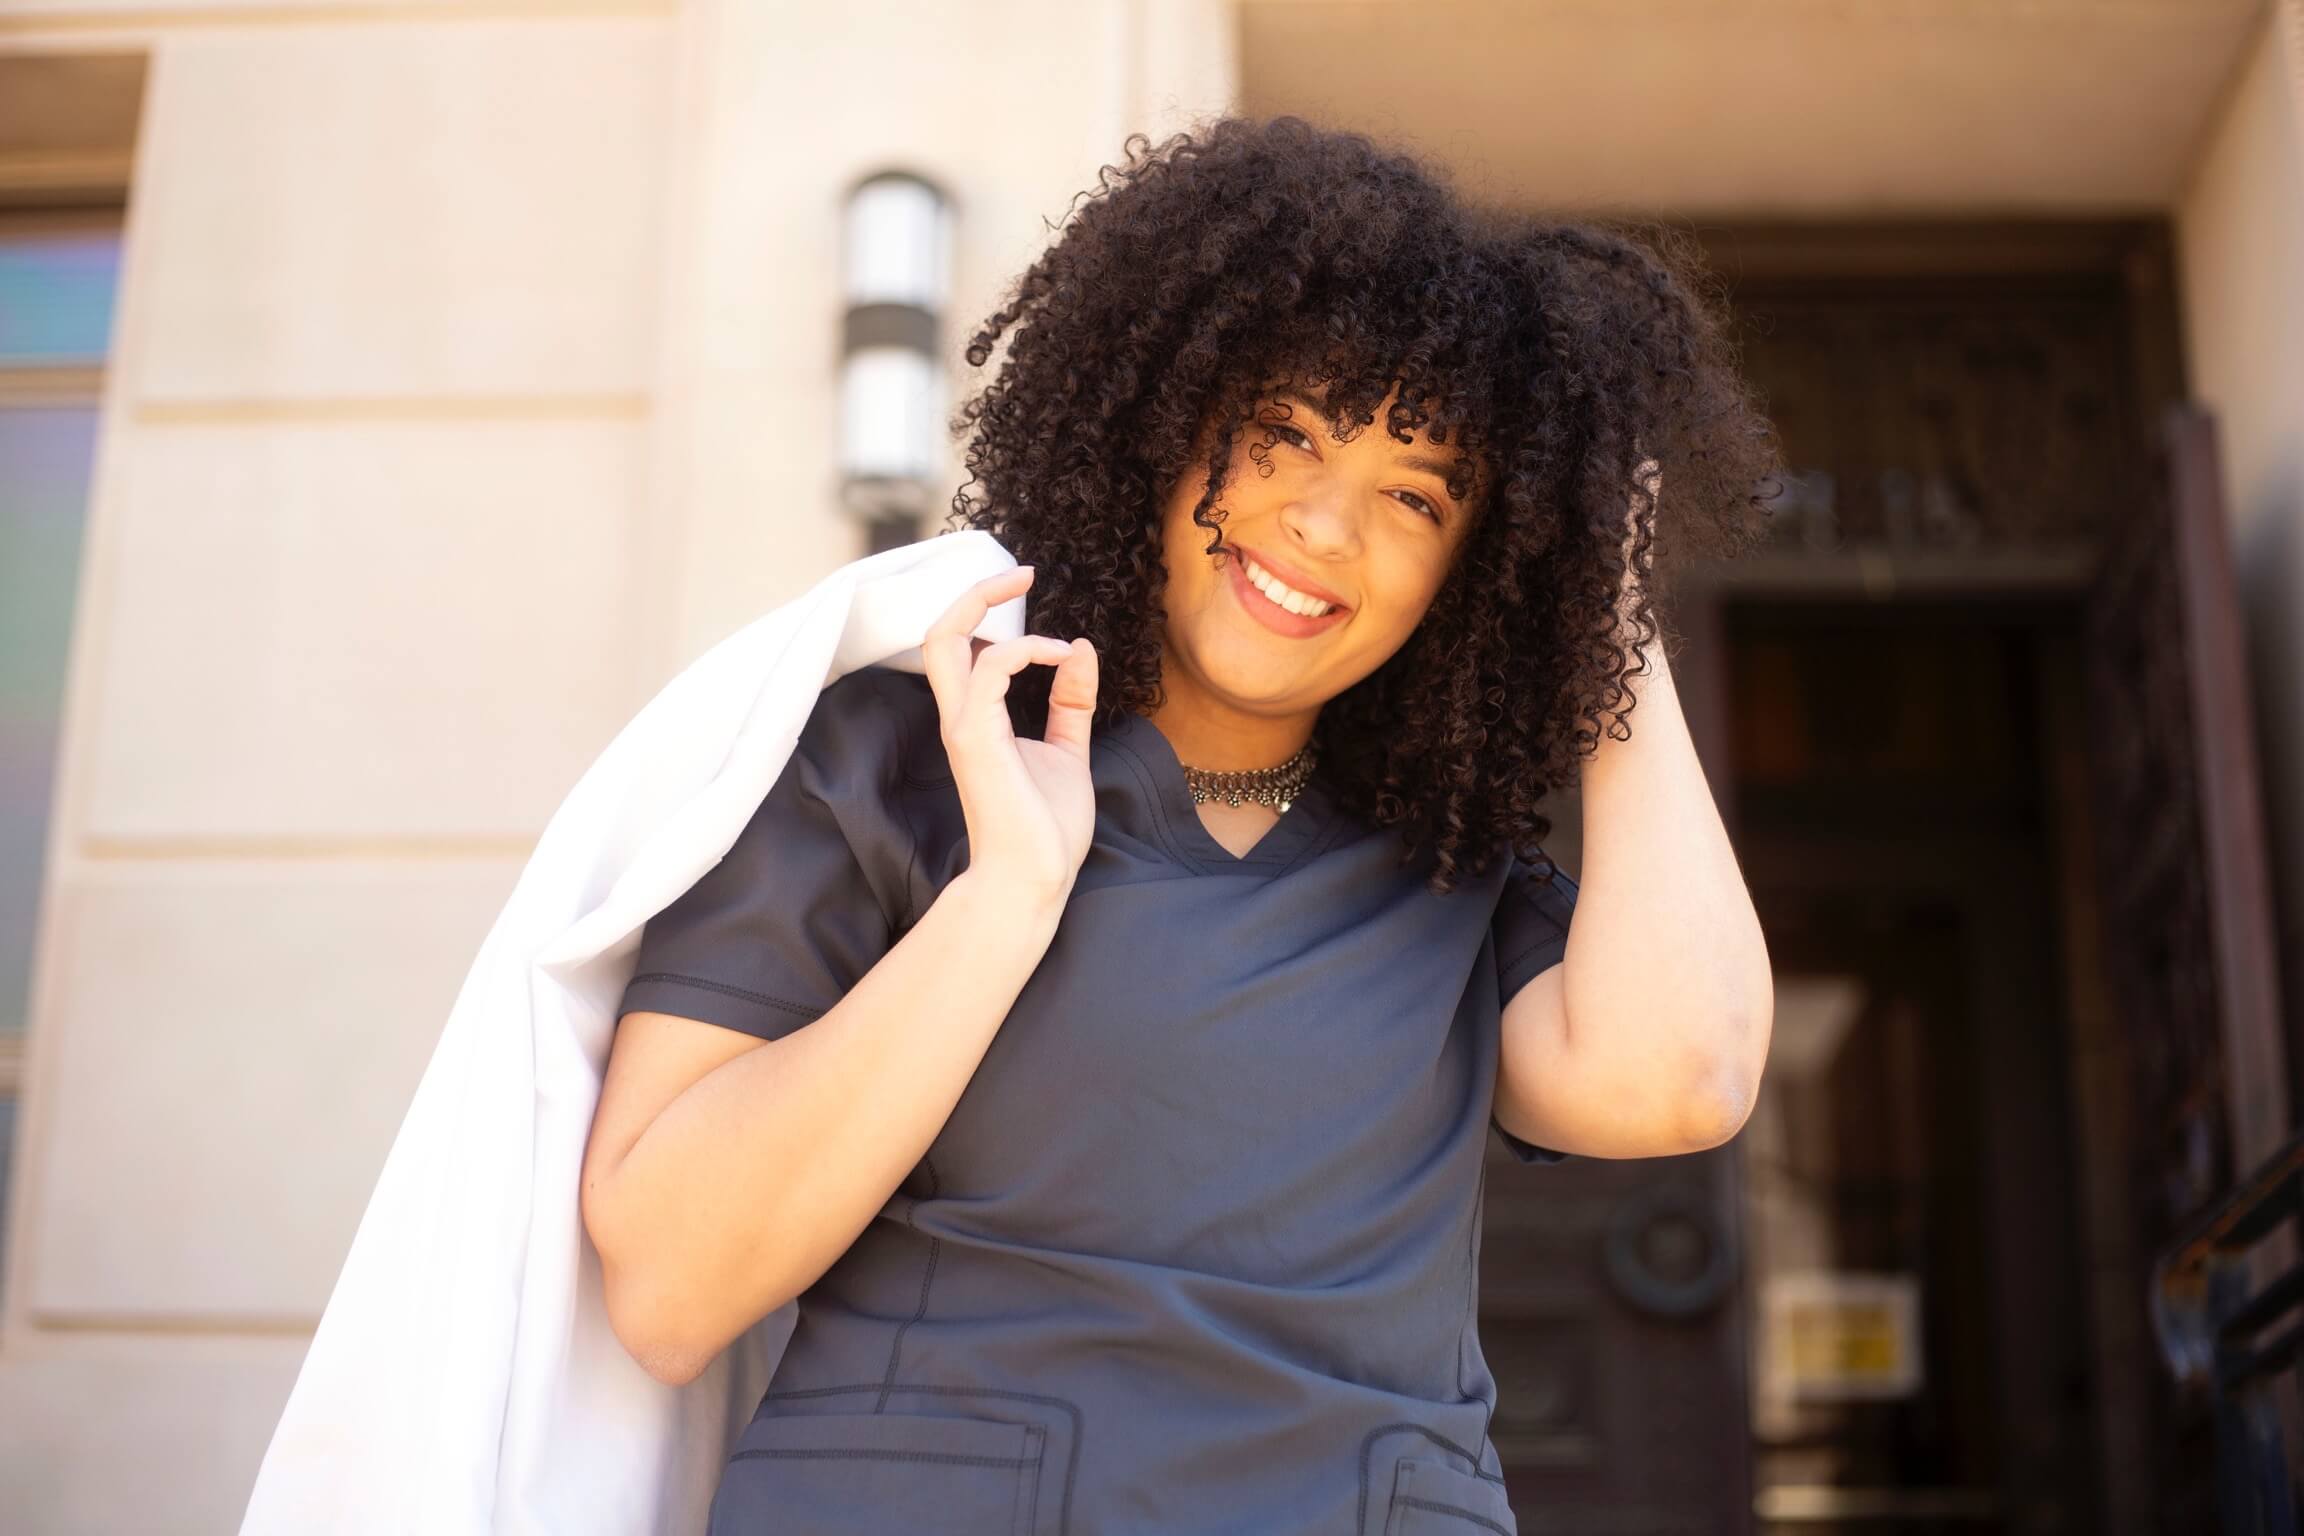 Pharmacy school and any healthcare program can truly be draining and hard on your soul and mind. Fight the funk and the tiredness that comes with a tough program with these 5 tips to keep you smiling and happy. Remember to keep your eye on the prize!